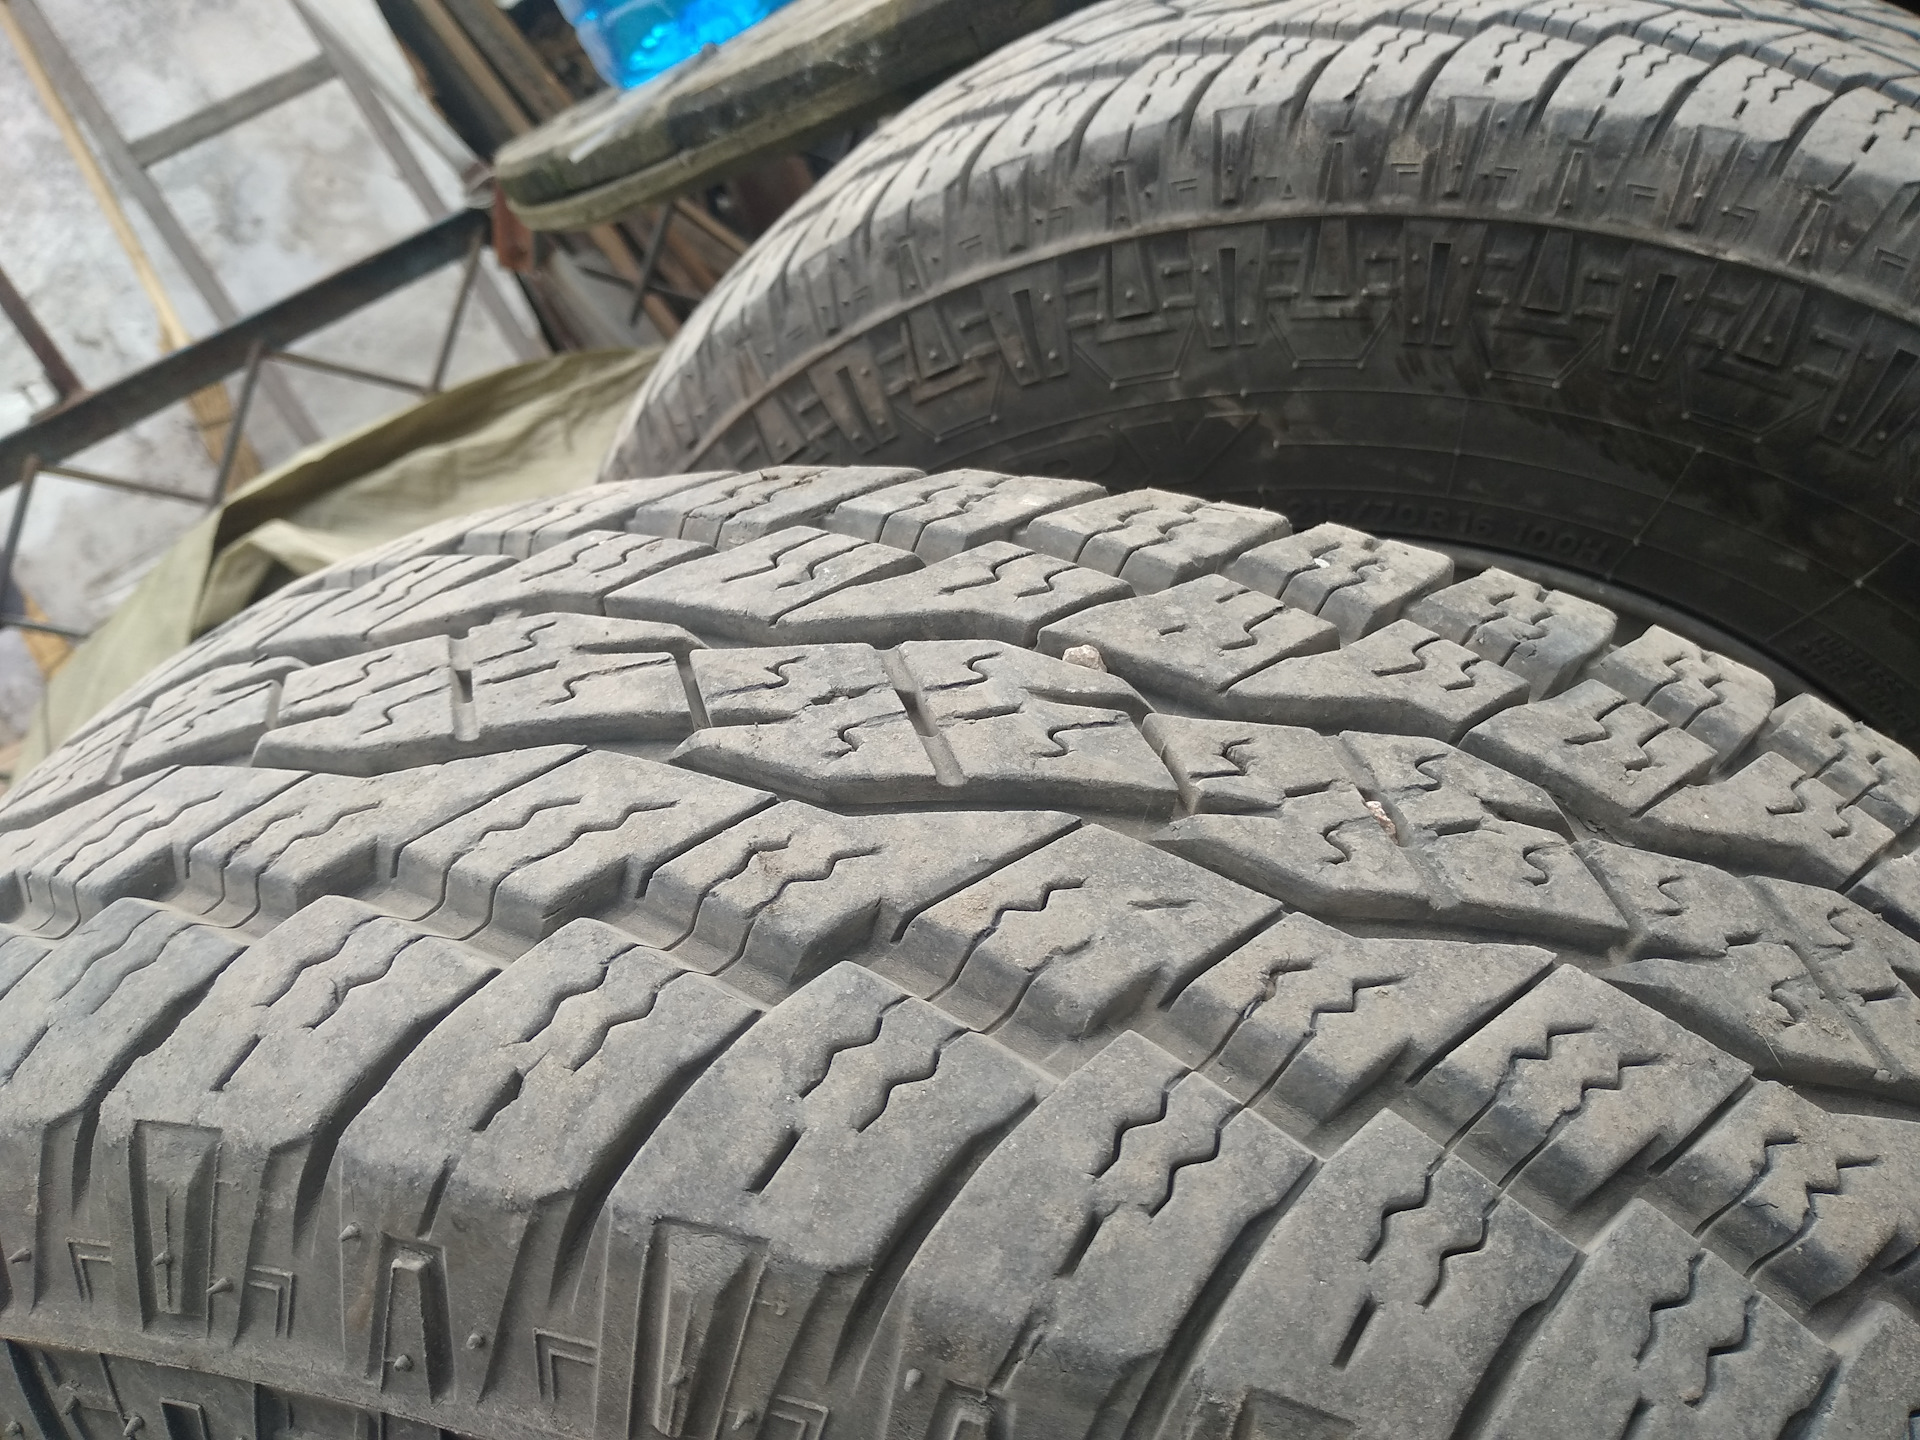 Open country отзывы. Toyo open Country a32. Toyo open Country a19. Toyo open Country a/t 2. Toyo open Country a/t Plus 235/65 r17.